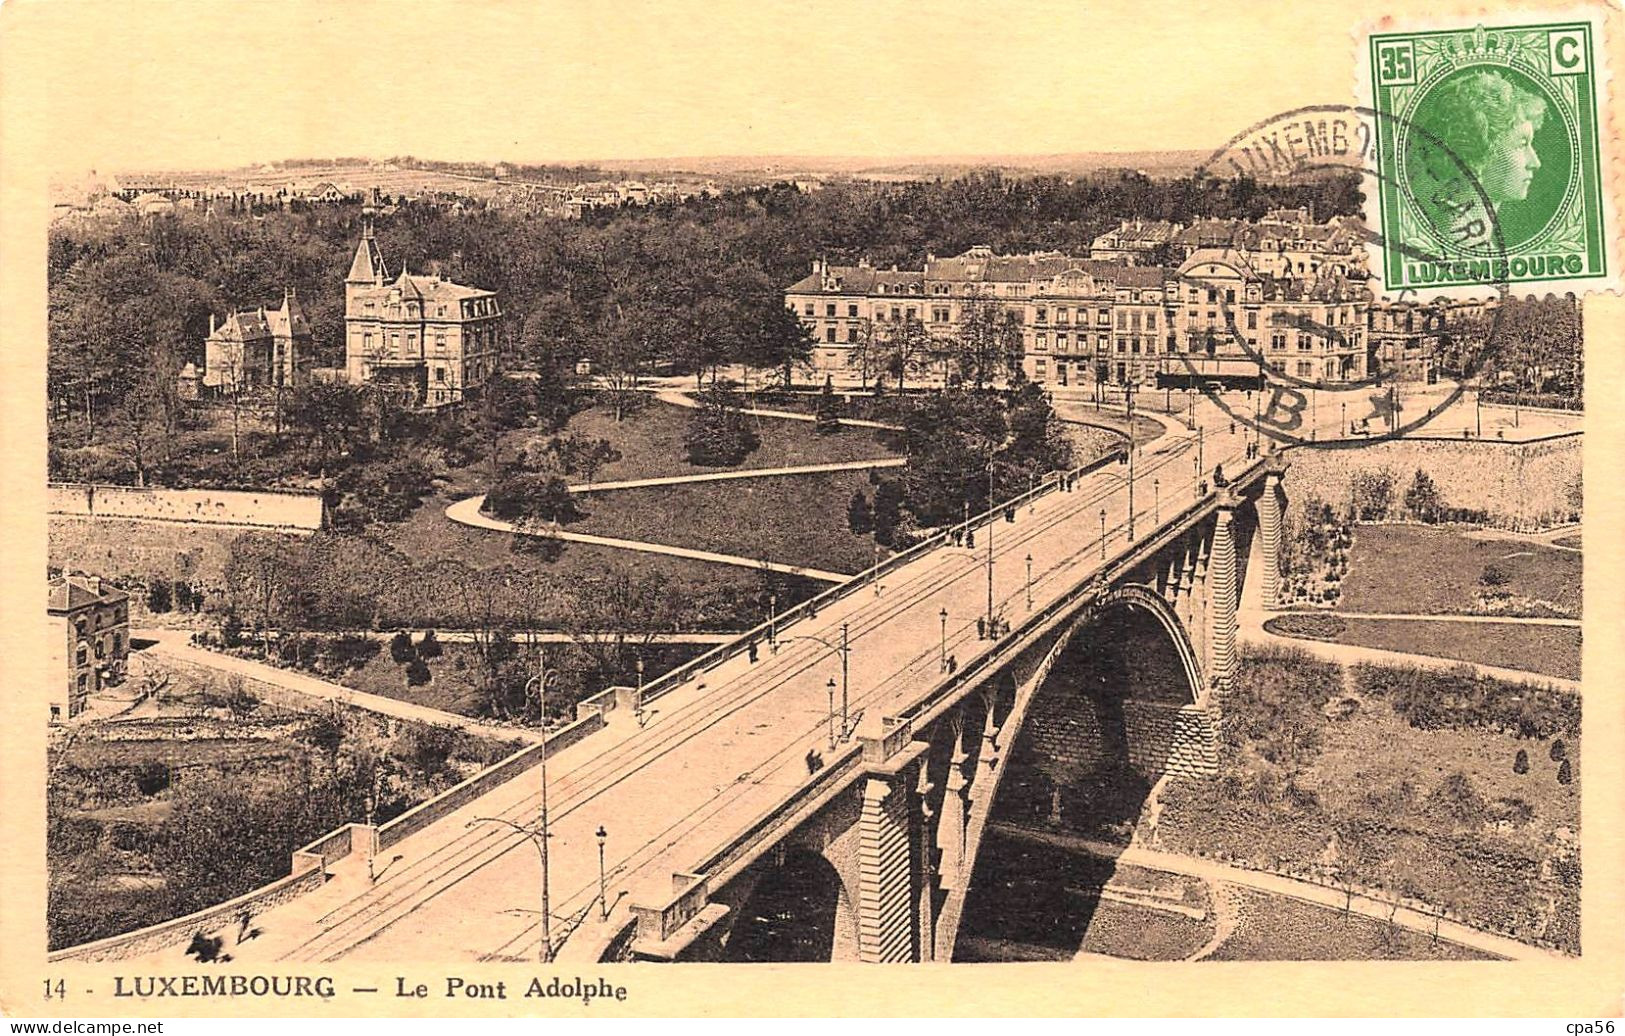 Le PONT ADOLPHE - LUXEMBOURG - Cachet LUXEMBOURG GARE B - Luxemburg - Town